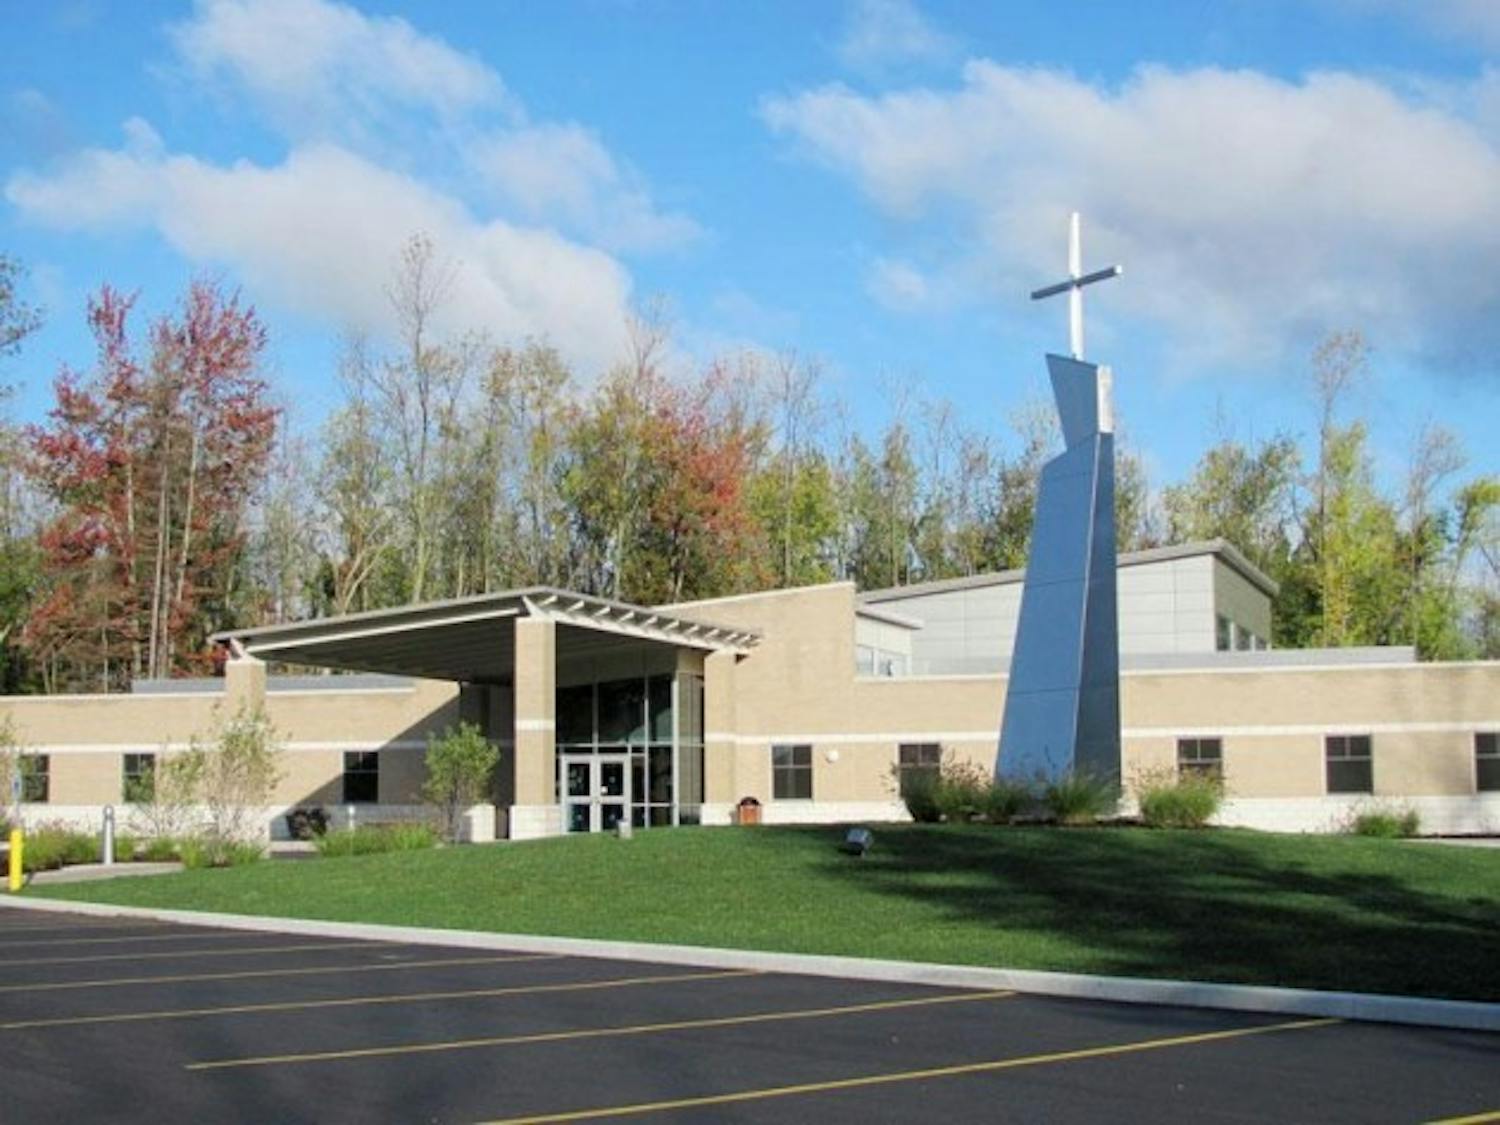 The Catholic Newman Center on North Campus will hold several services for Easter weekend that students who can't go home for Easter can attend. There will be a washing of feet and mass on Holy Thursday, a "solemn service" on Good Friday, mass on Holy Saturday and sunrise mass held outside on Easter Sunday.